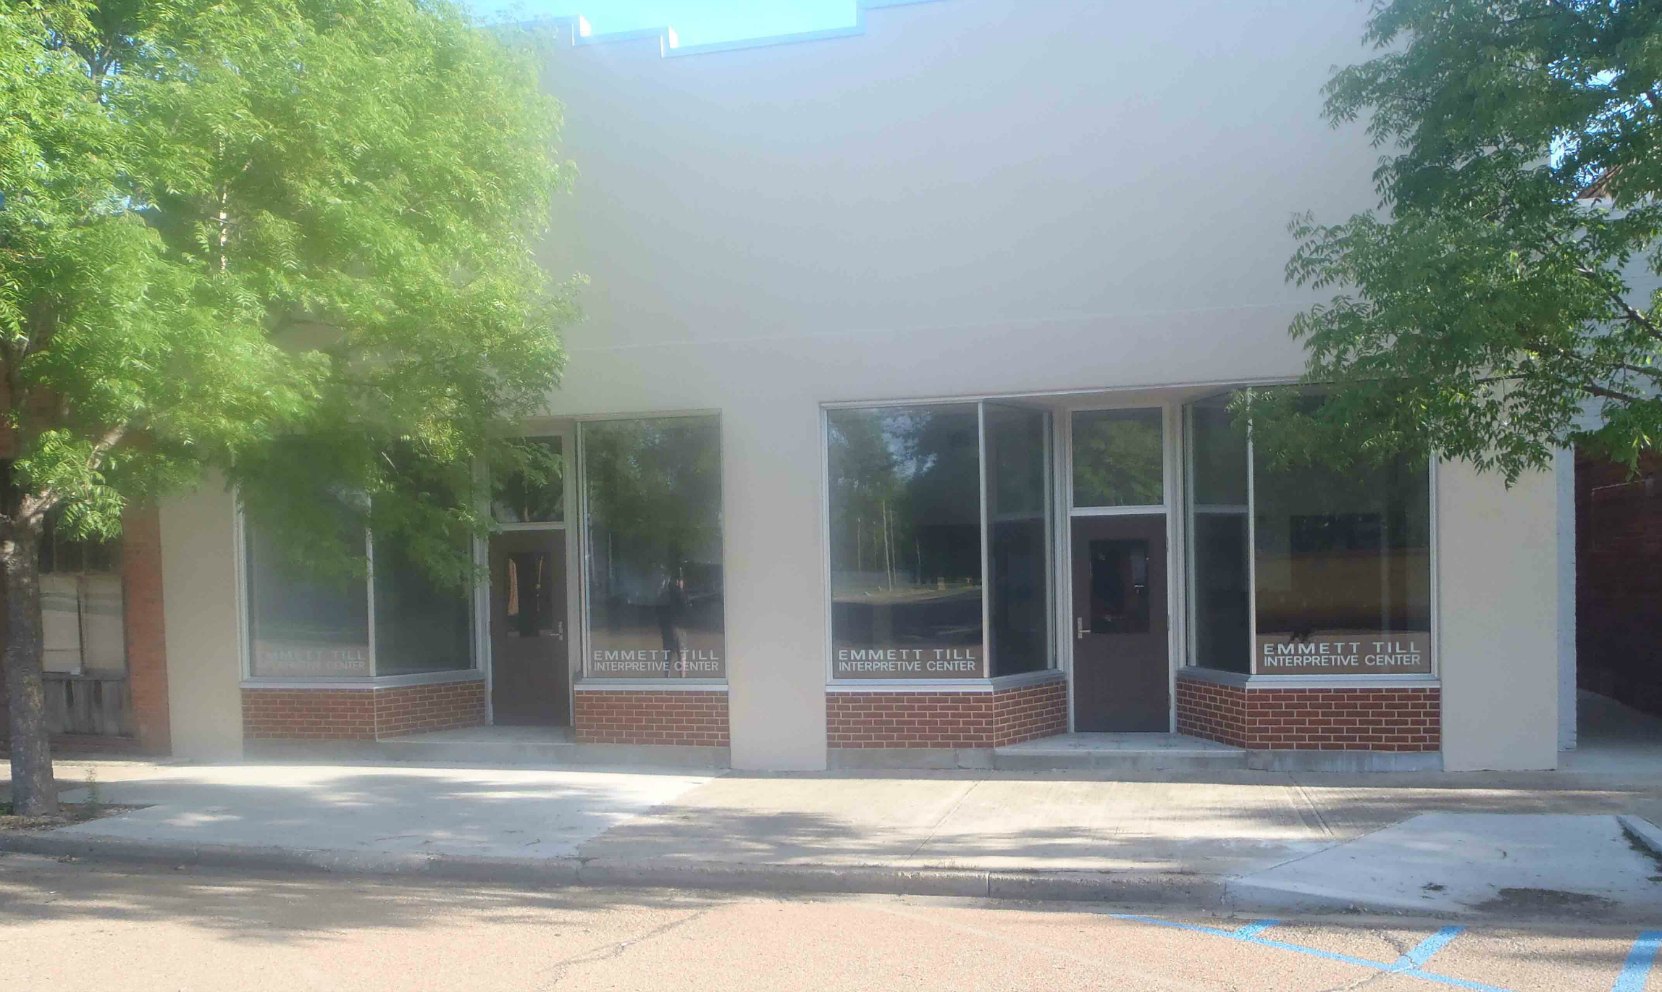 Emmett Till Interpretive Centre, across the street from the Tallahatchie County Court House, Sumner, Mississippi